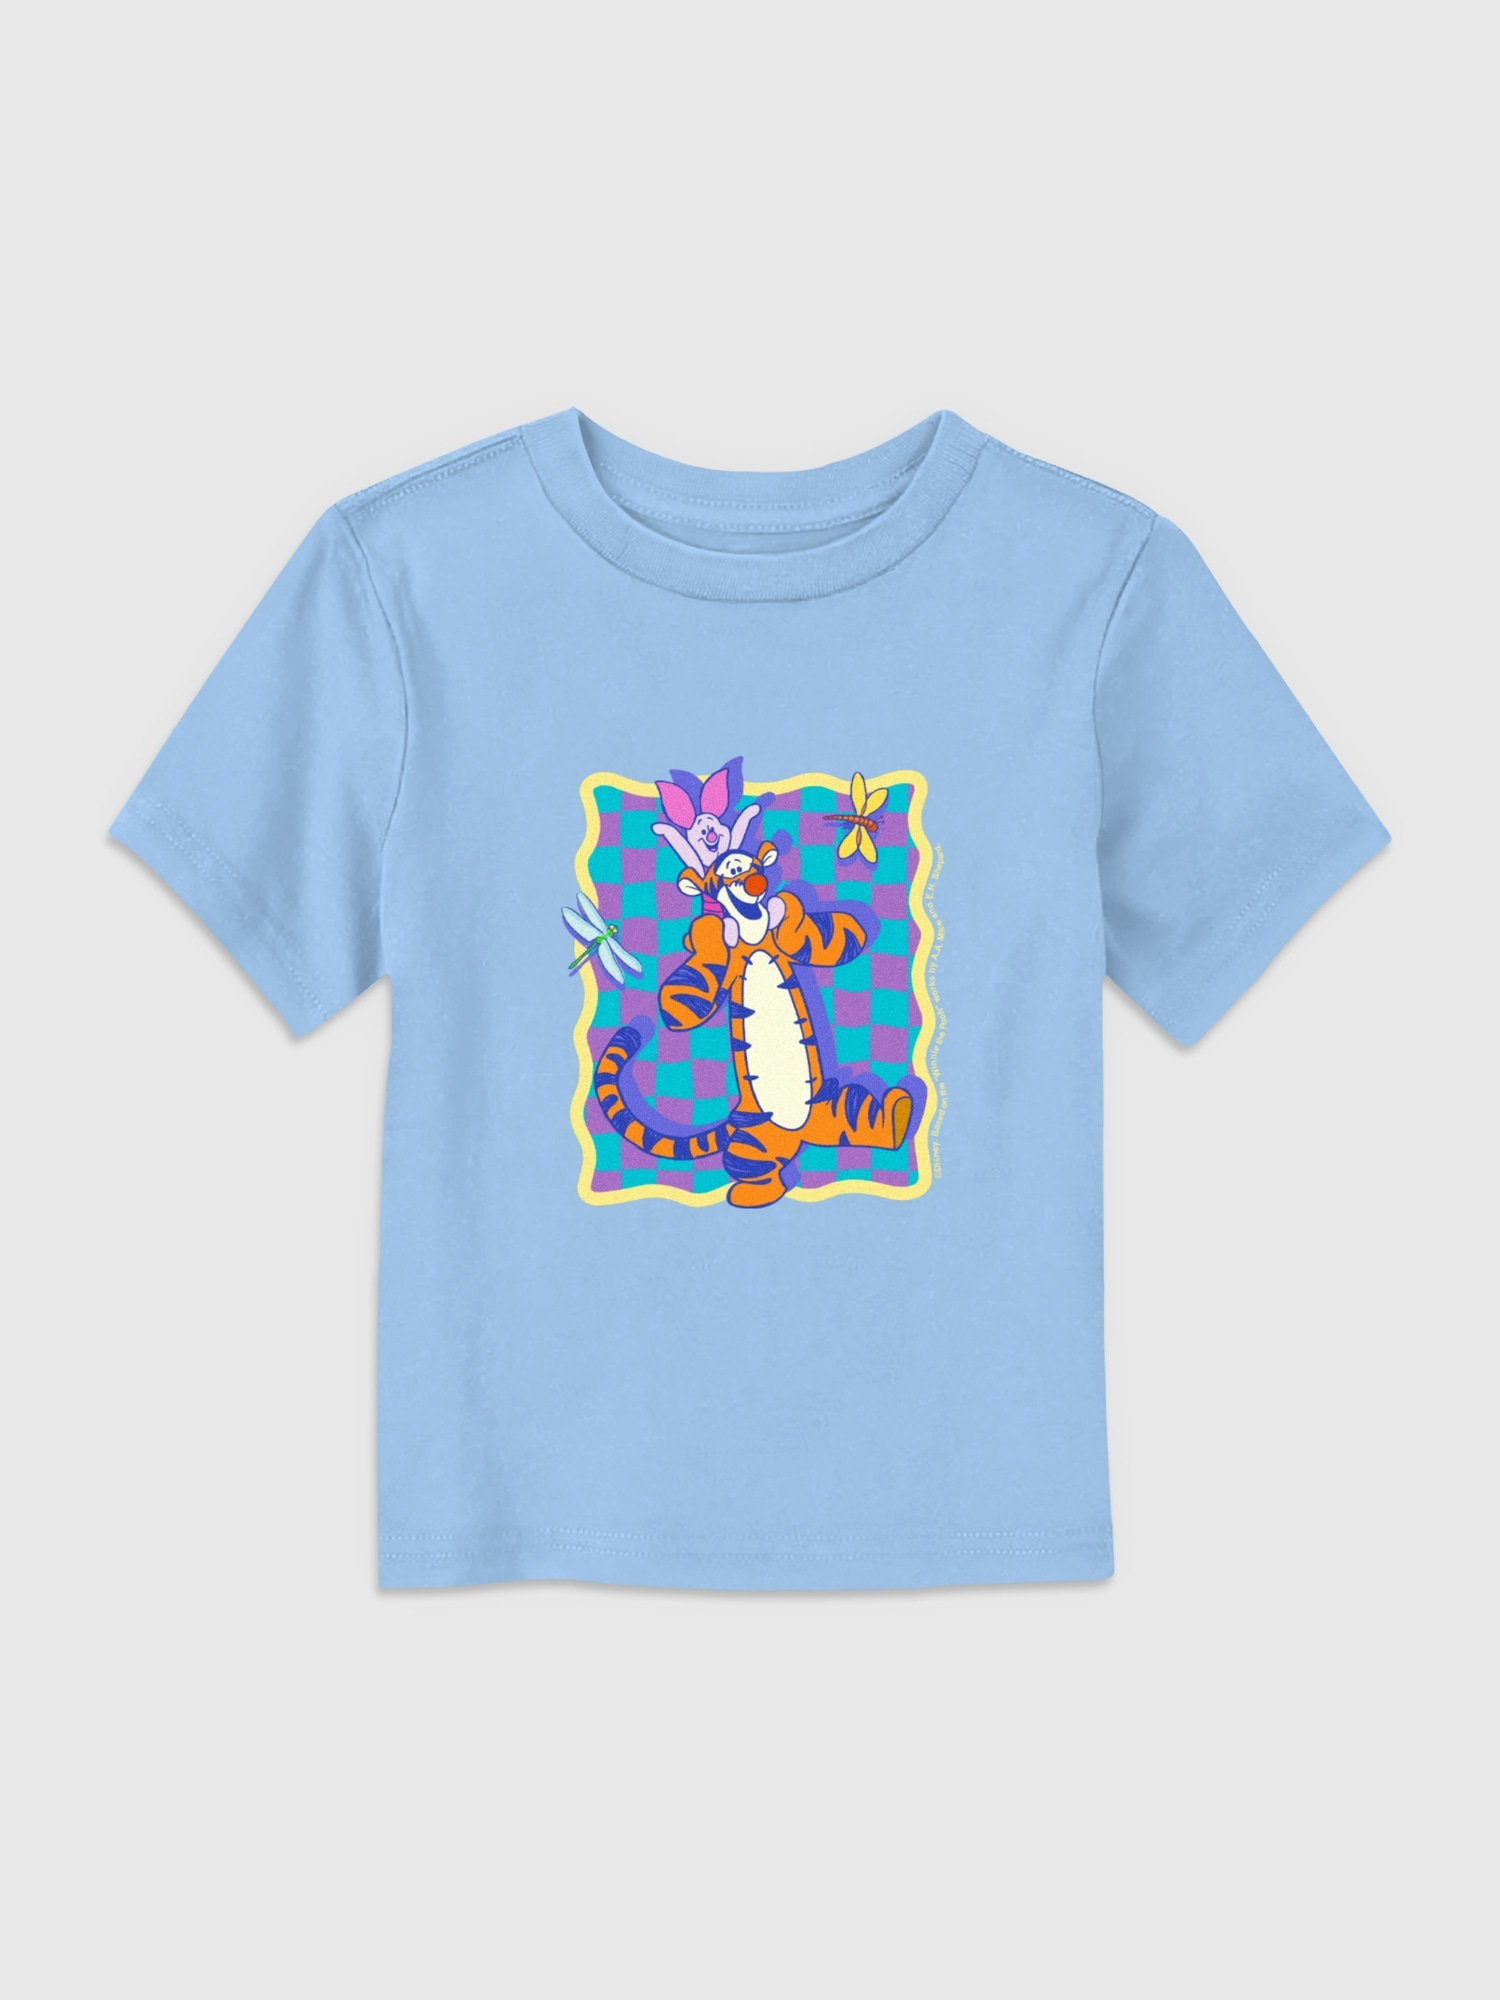 Toddler Winnie the Pooh Tigger and Piglet Graphic Tee